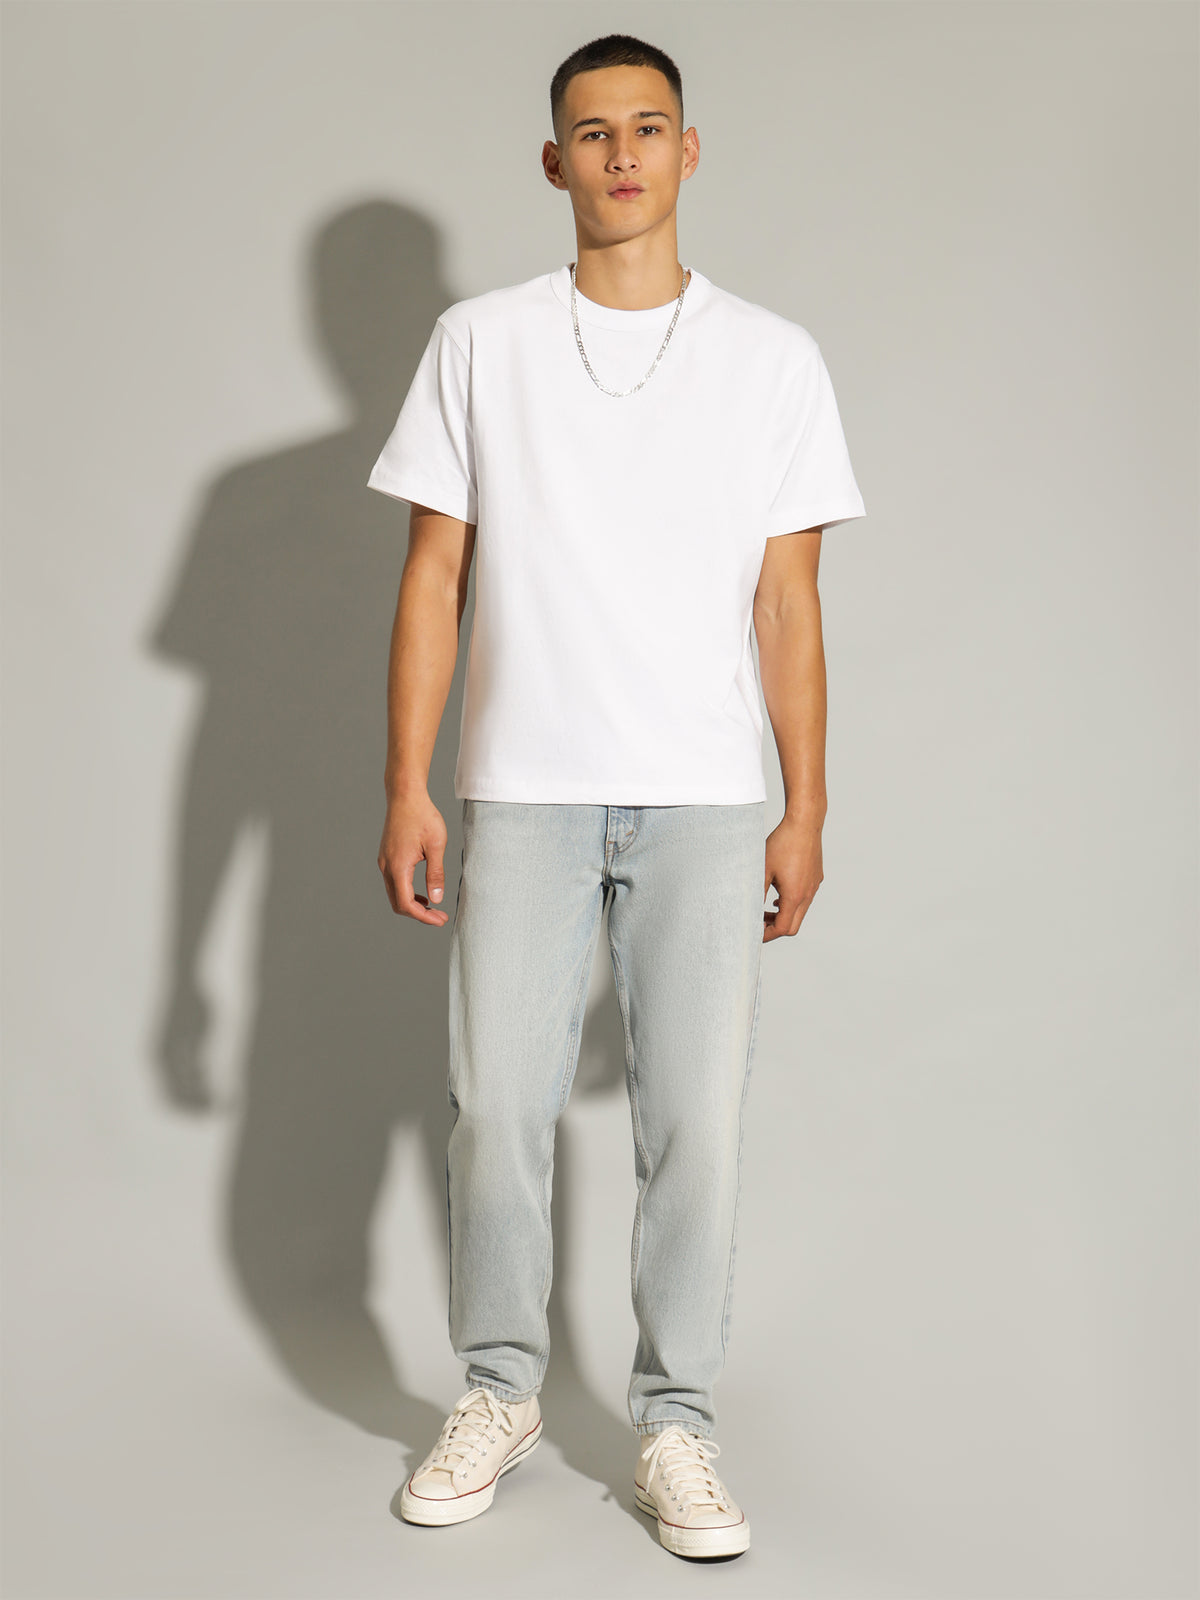 500 92&#39; Tapered Jeans in Relaxed In The Waves